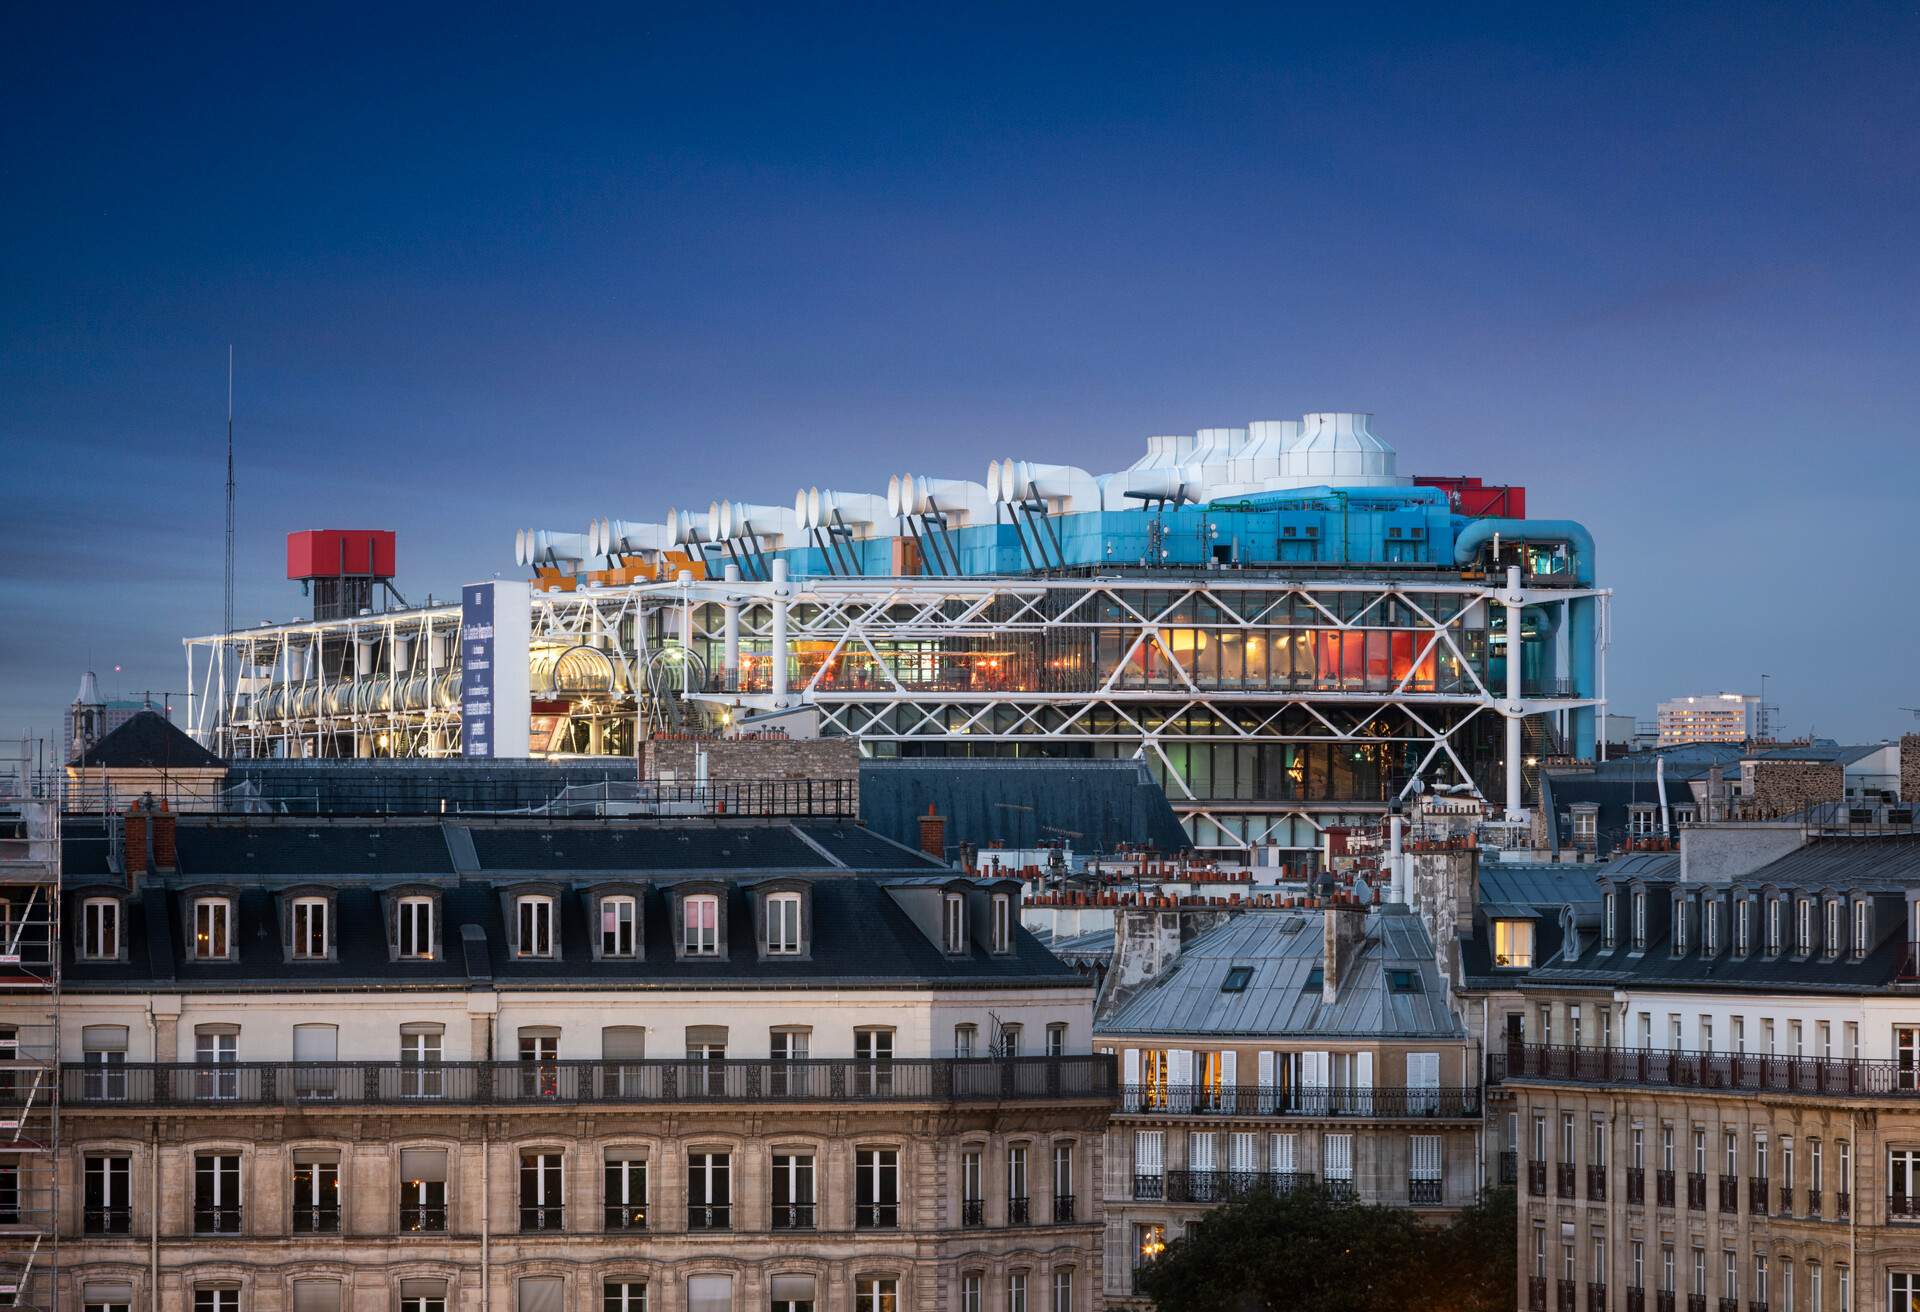 An evening shot of the colourful and industrial building of the museum of Pompidou in the middle of Paris with french apartment buildings in front